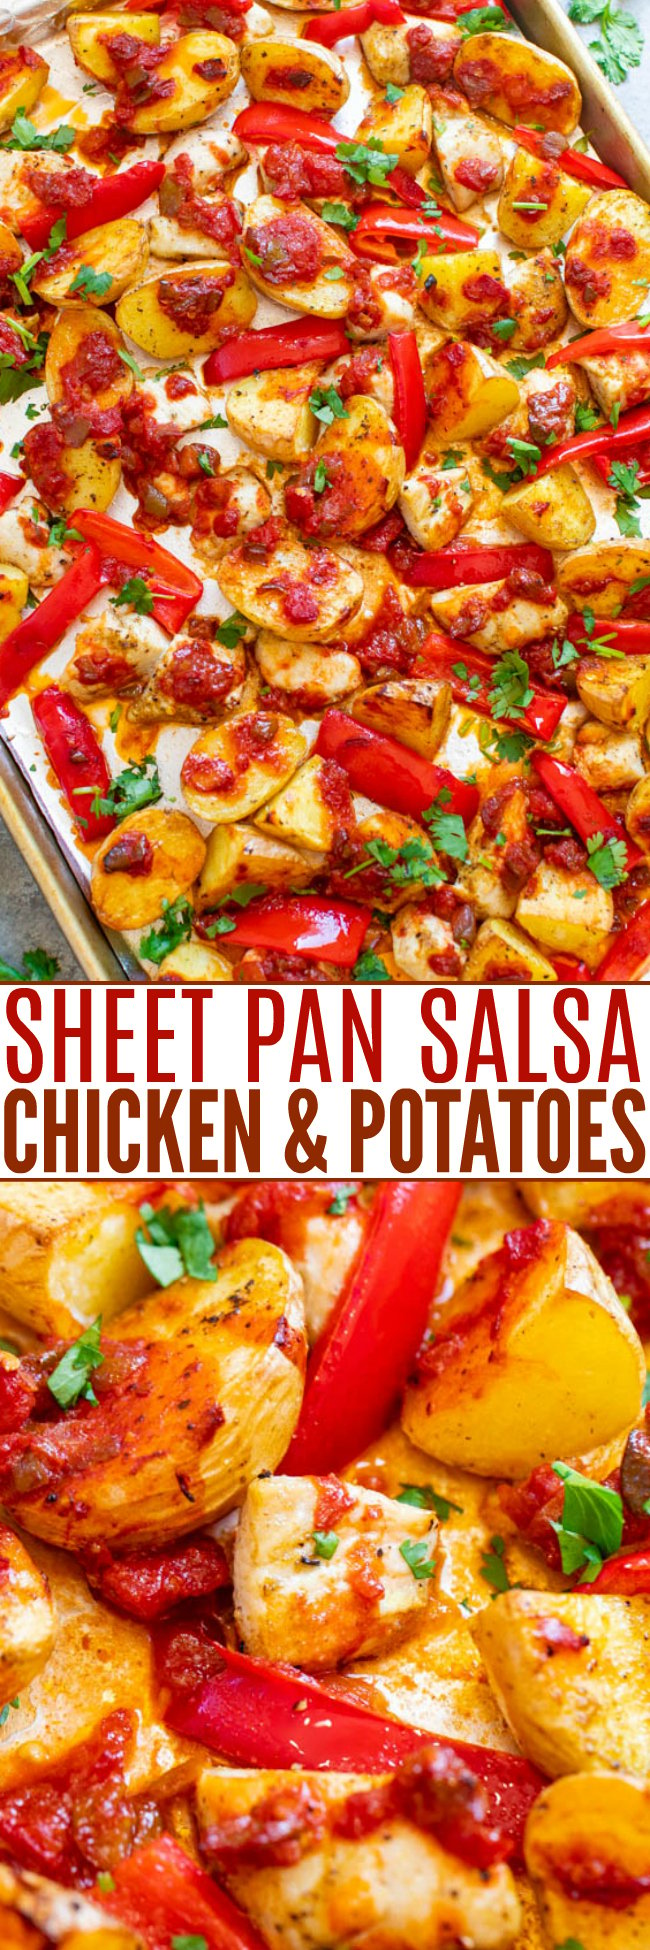 Sheet Pan Baked Salsa Chicken and Potatoes — An EASY dinner that's ready in 30 minutes and made on ONE pan with so much FLAVOR!! The salsa keeps the chicken so juicy for a winner-winner-chicken-dinner that's perfect for busy nights!!